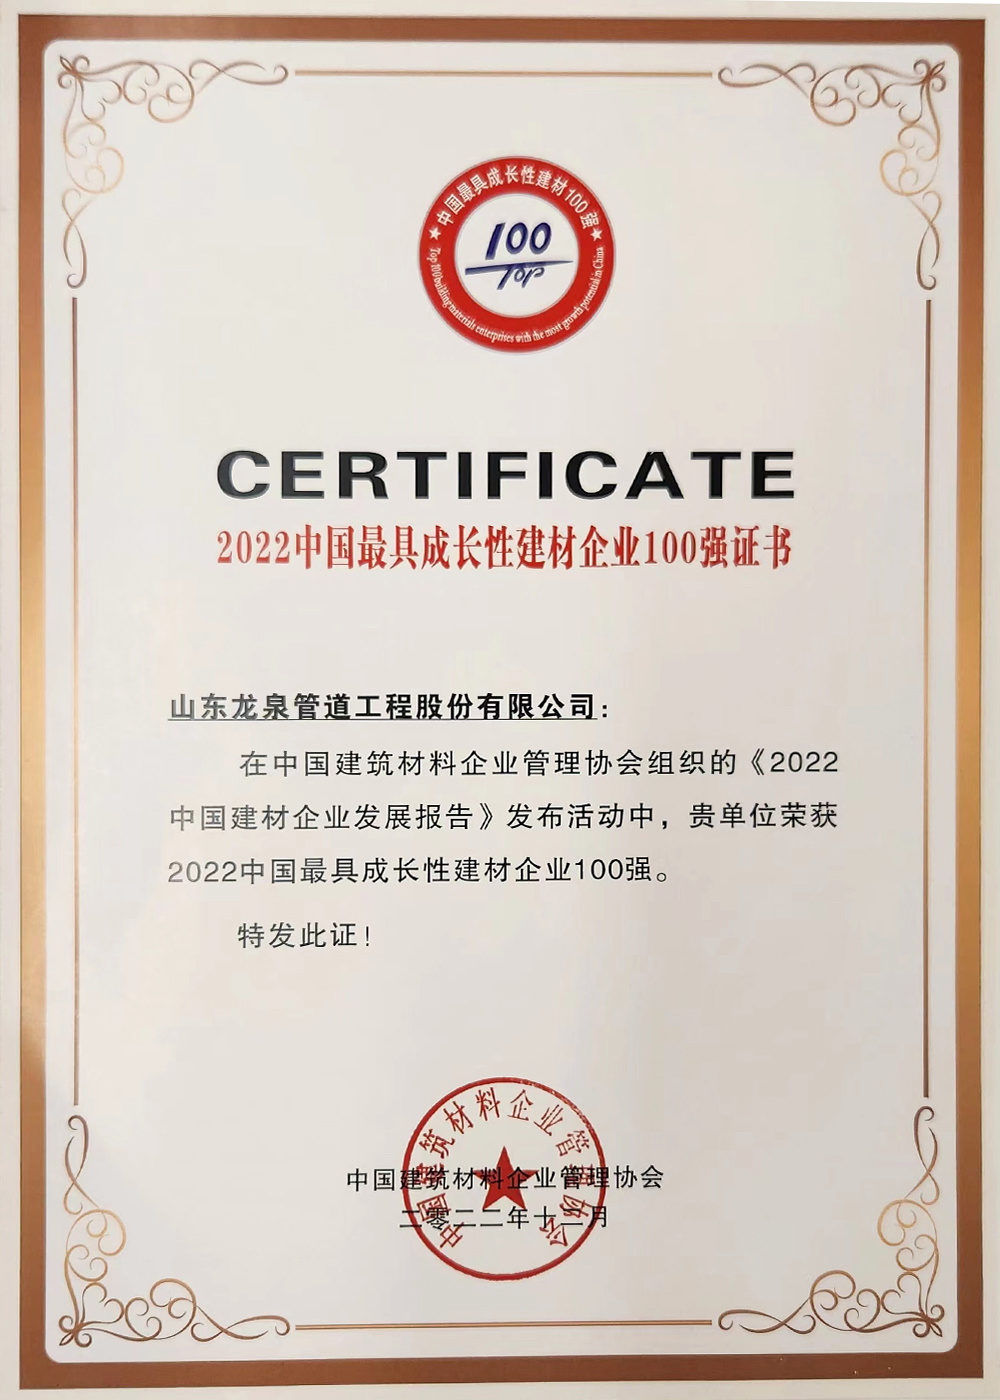 2022 China's most growth building materials enterprise 100 certificate